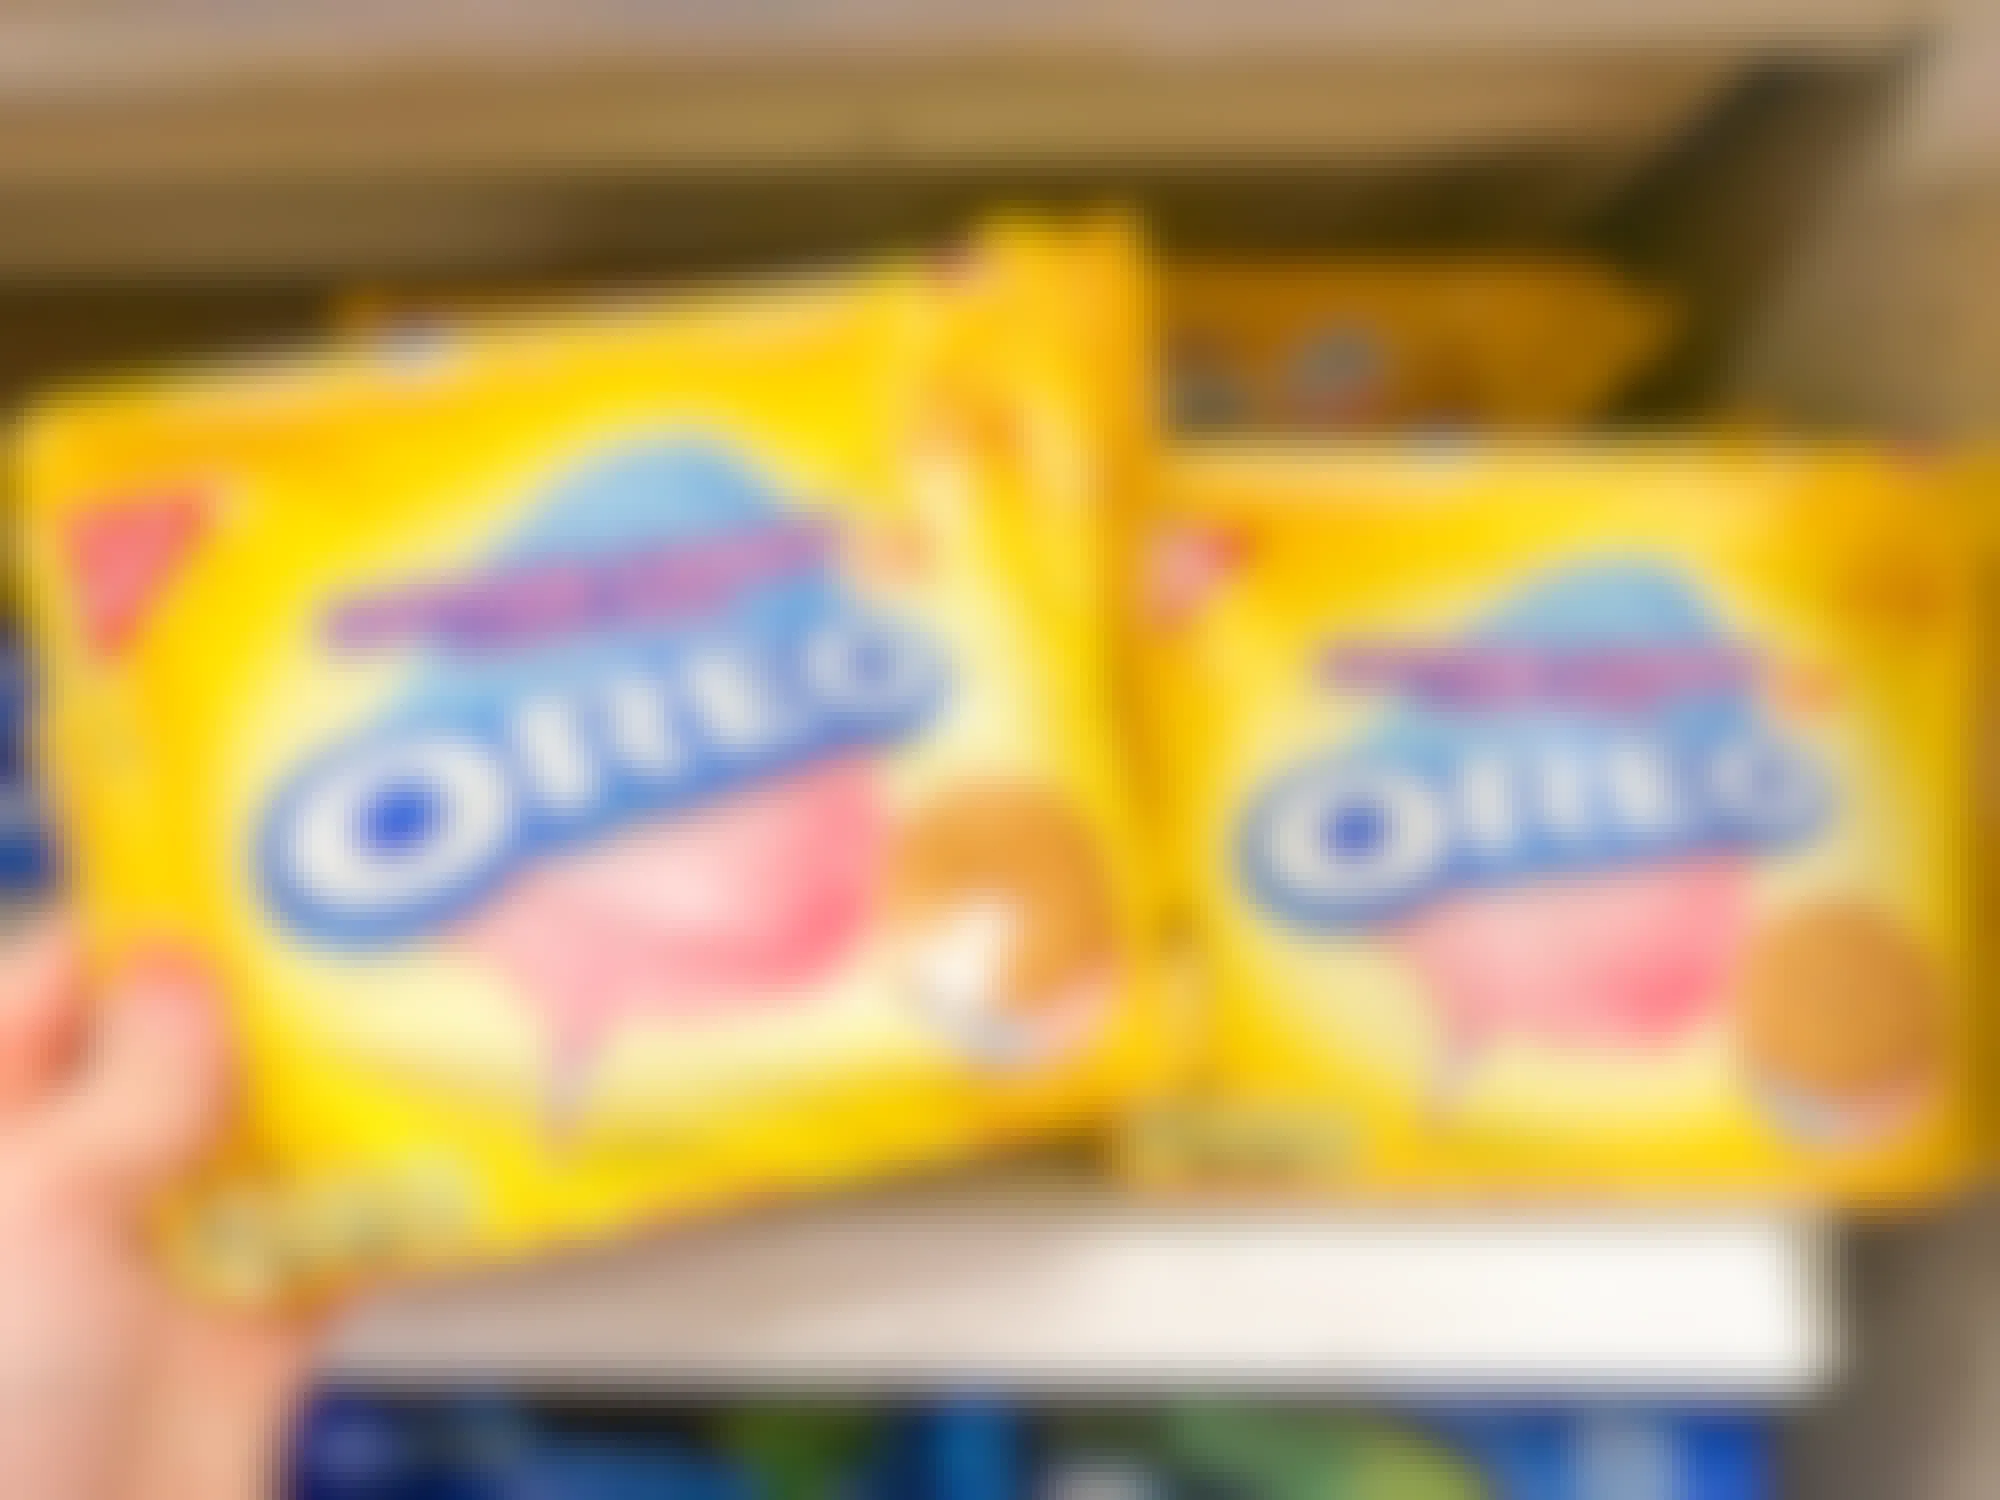 Cotton Candy Flavored Oreos Are Back for a Limited Time